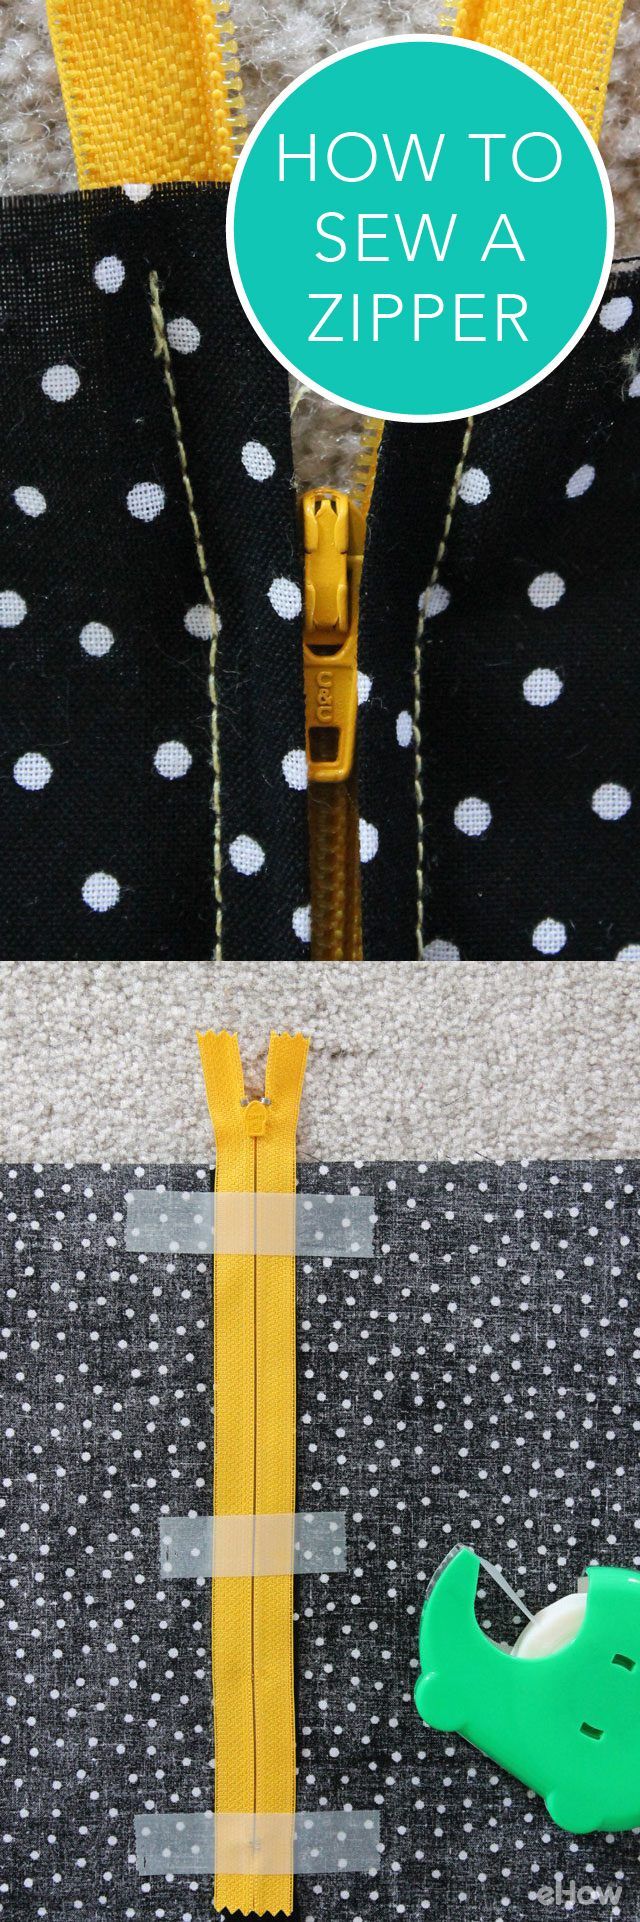 Learning how to sew on a zipper may sound difficult, but with this step-by-step tu